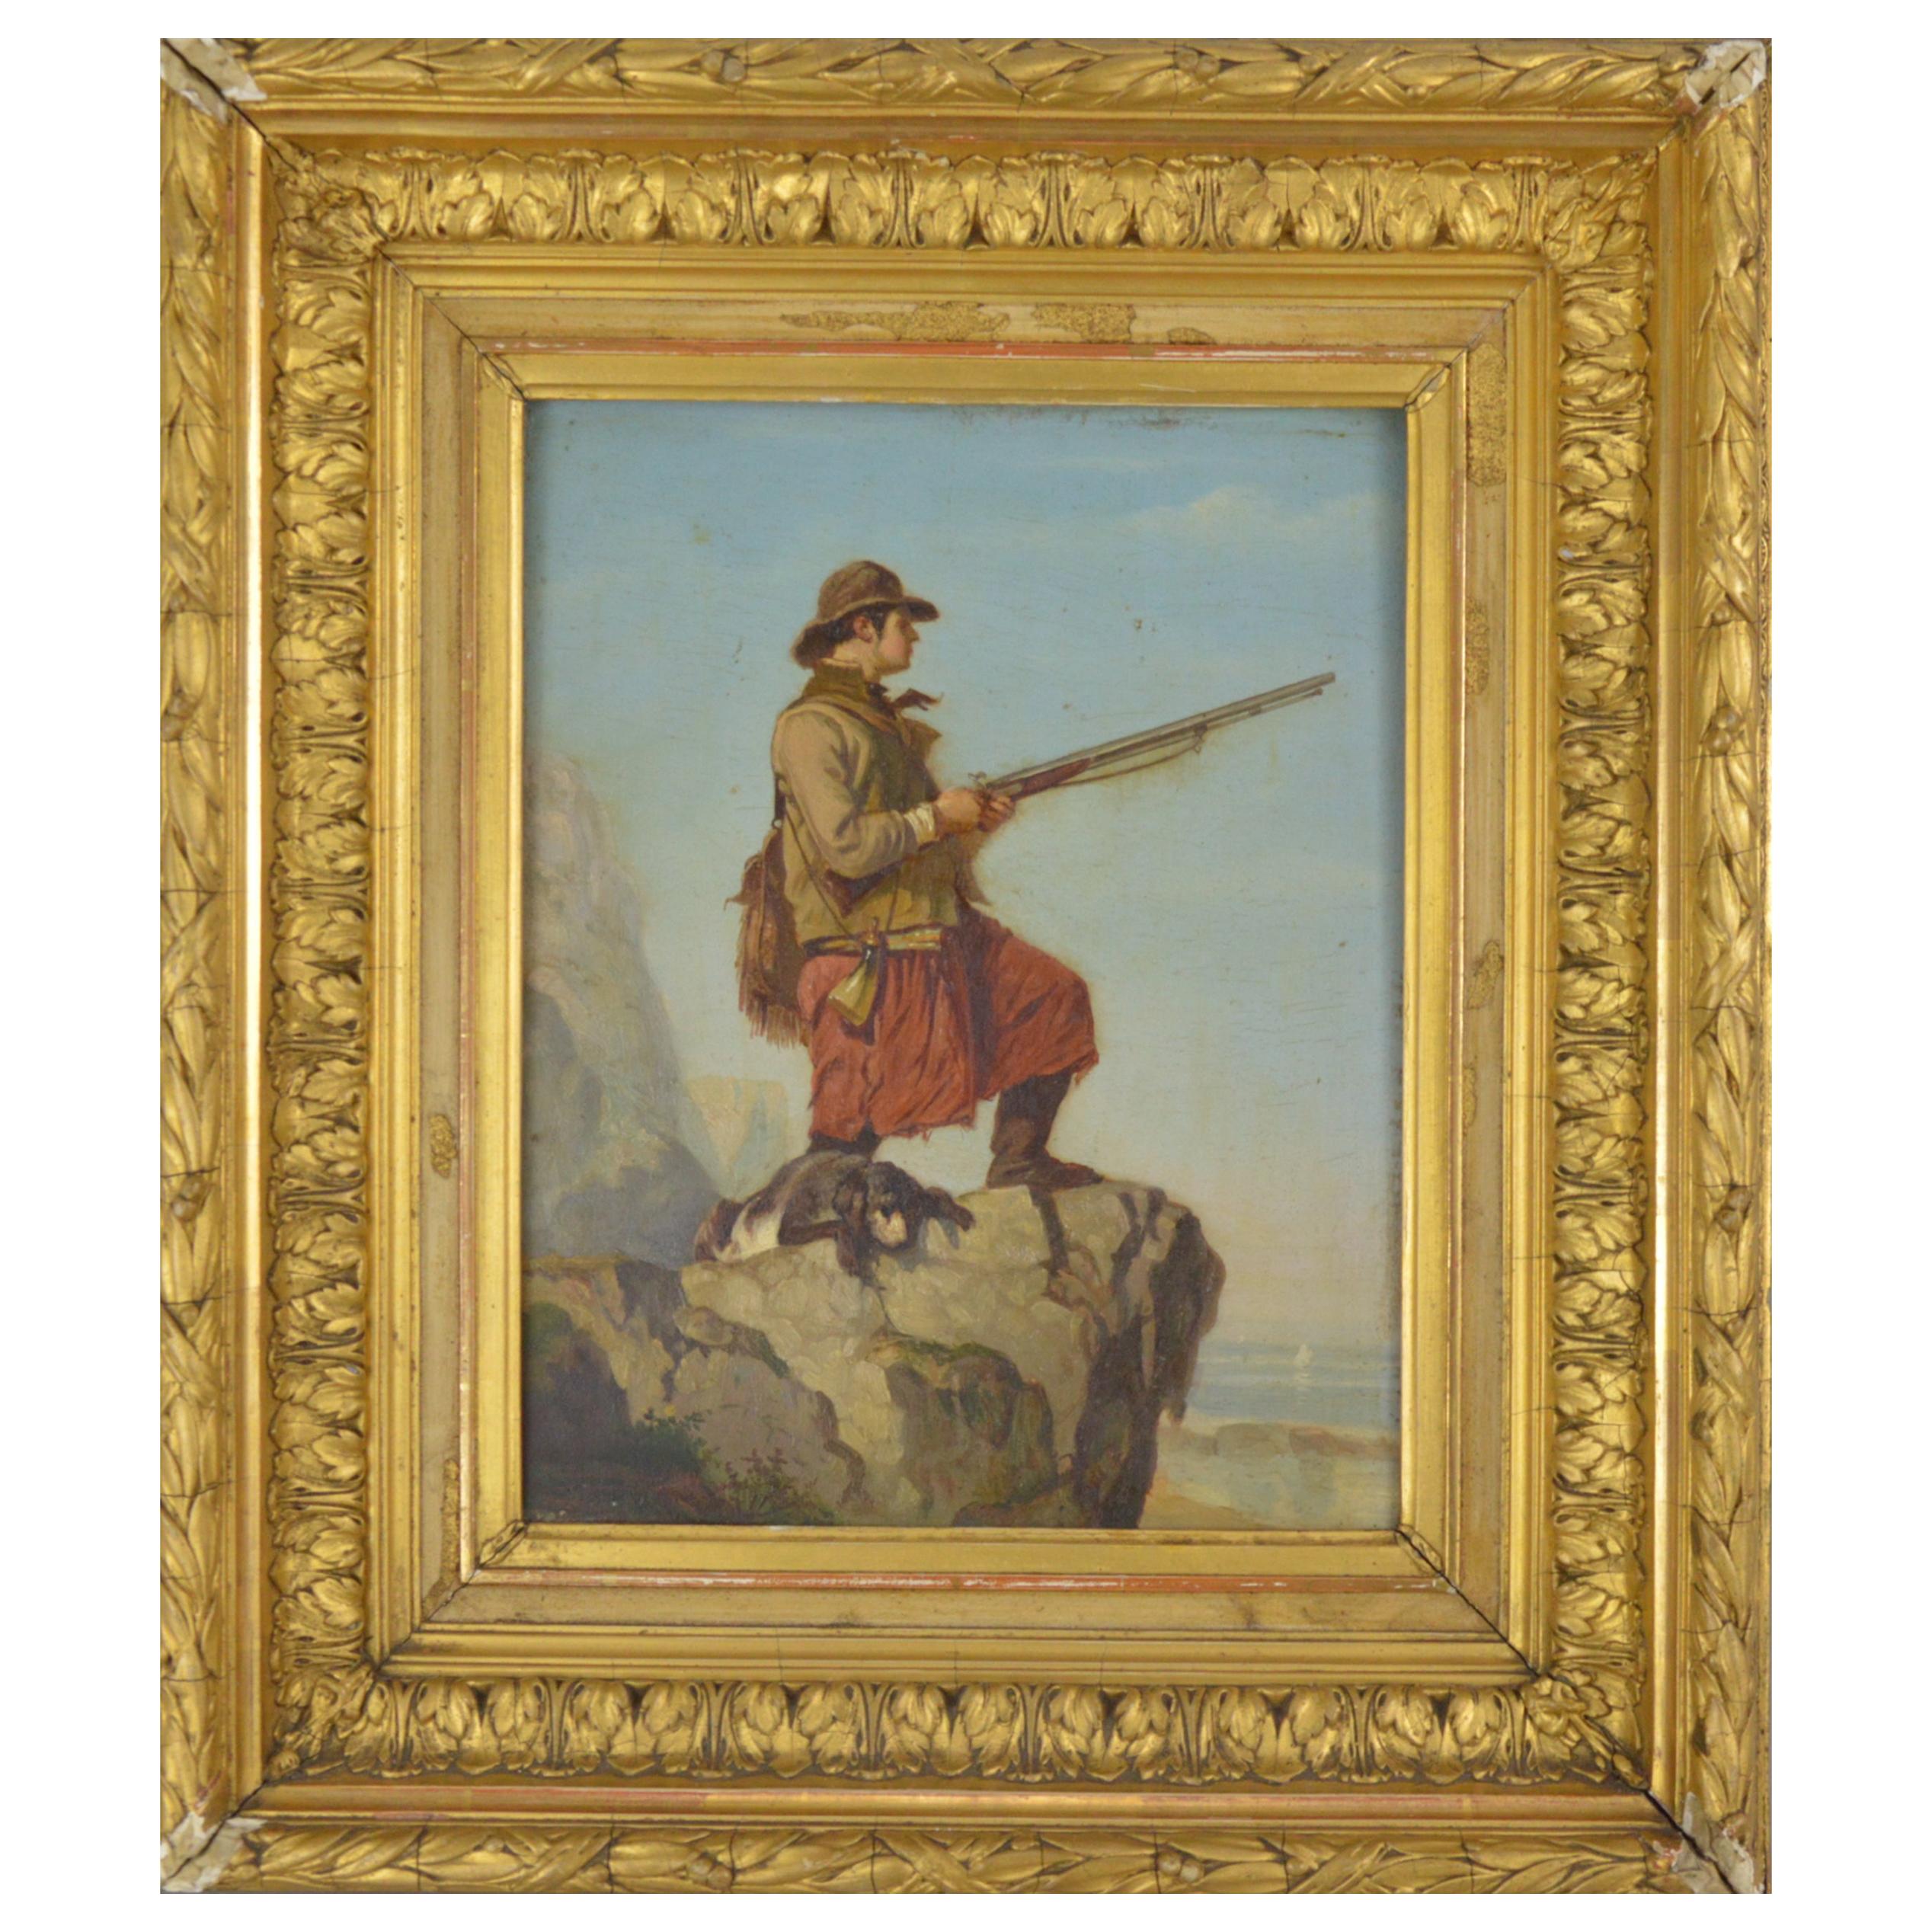 Le Fevere De Tenhove Painting Hunter with a Dog 1884 Belgian School 19th Century For Sale